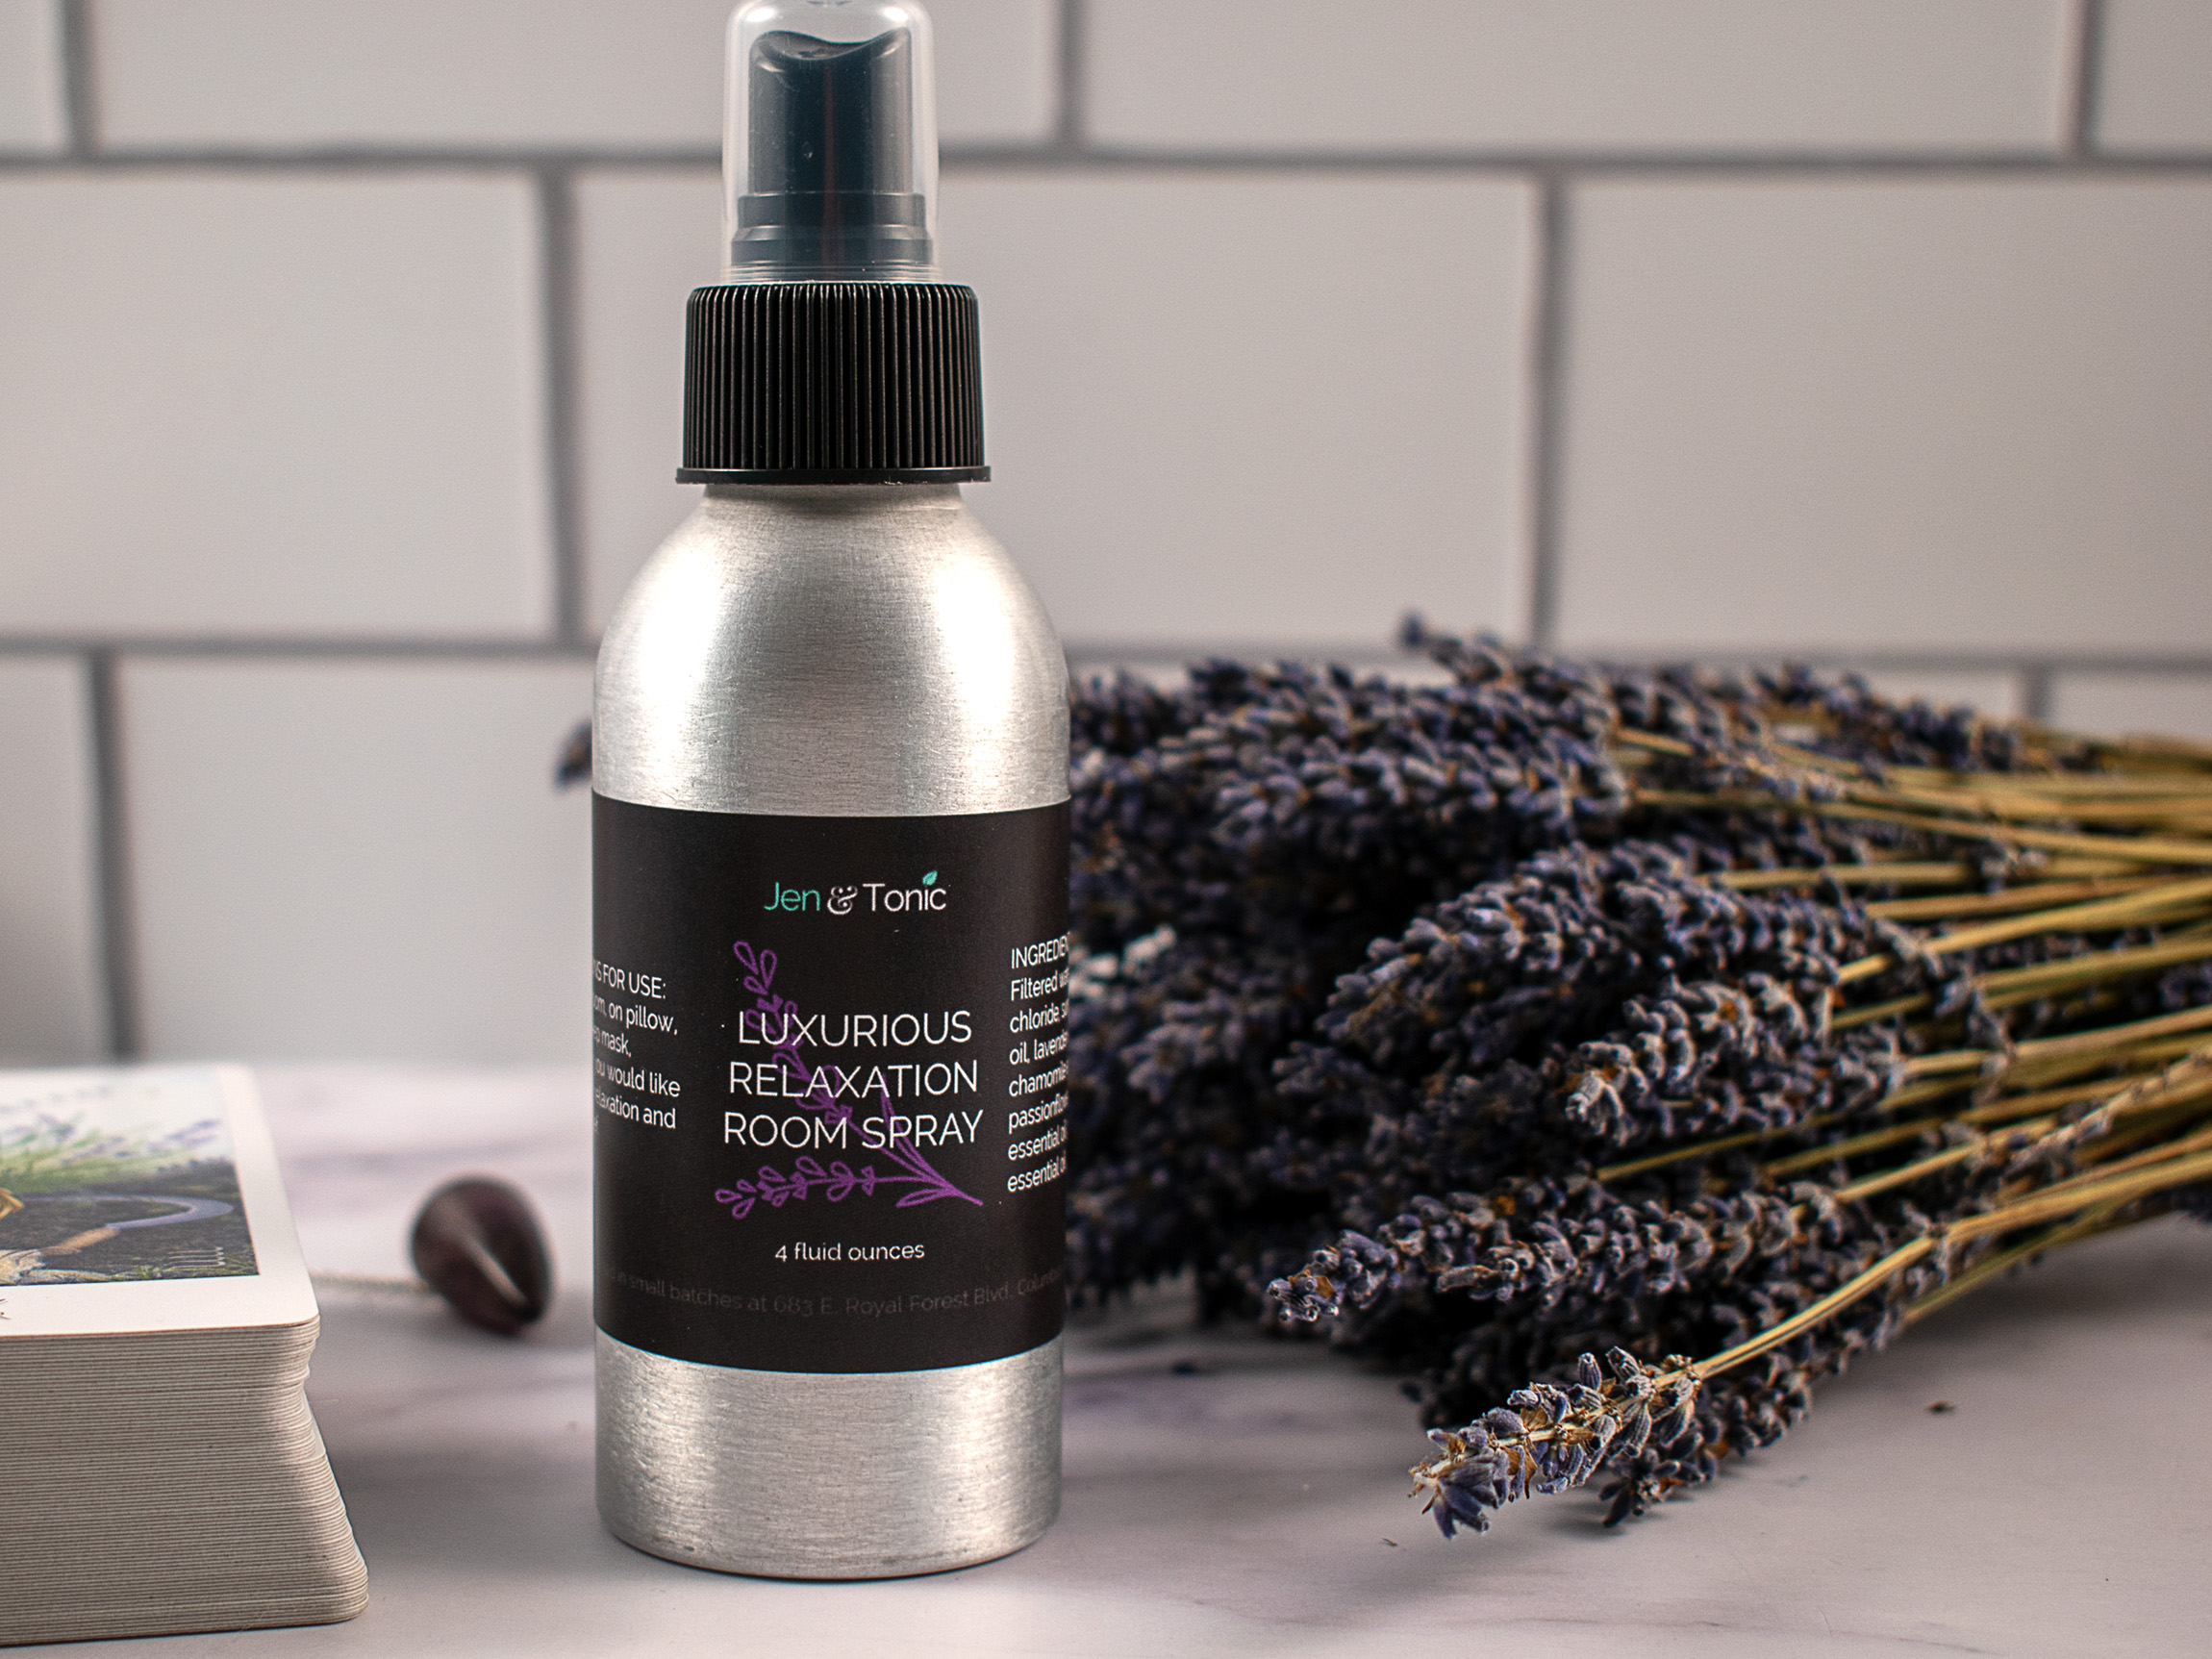 Lavender Fields Body Linen and Room Spray - The Little Herb House